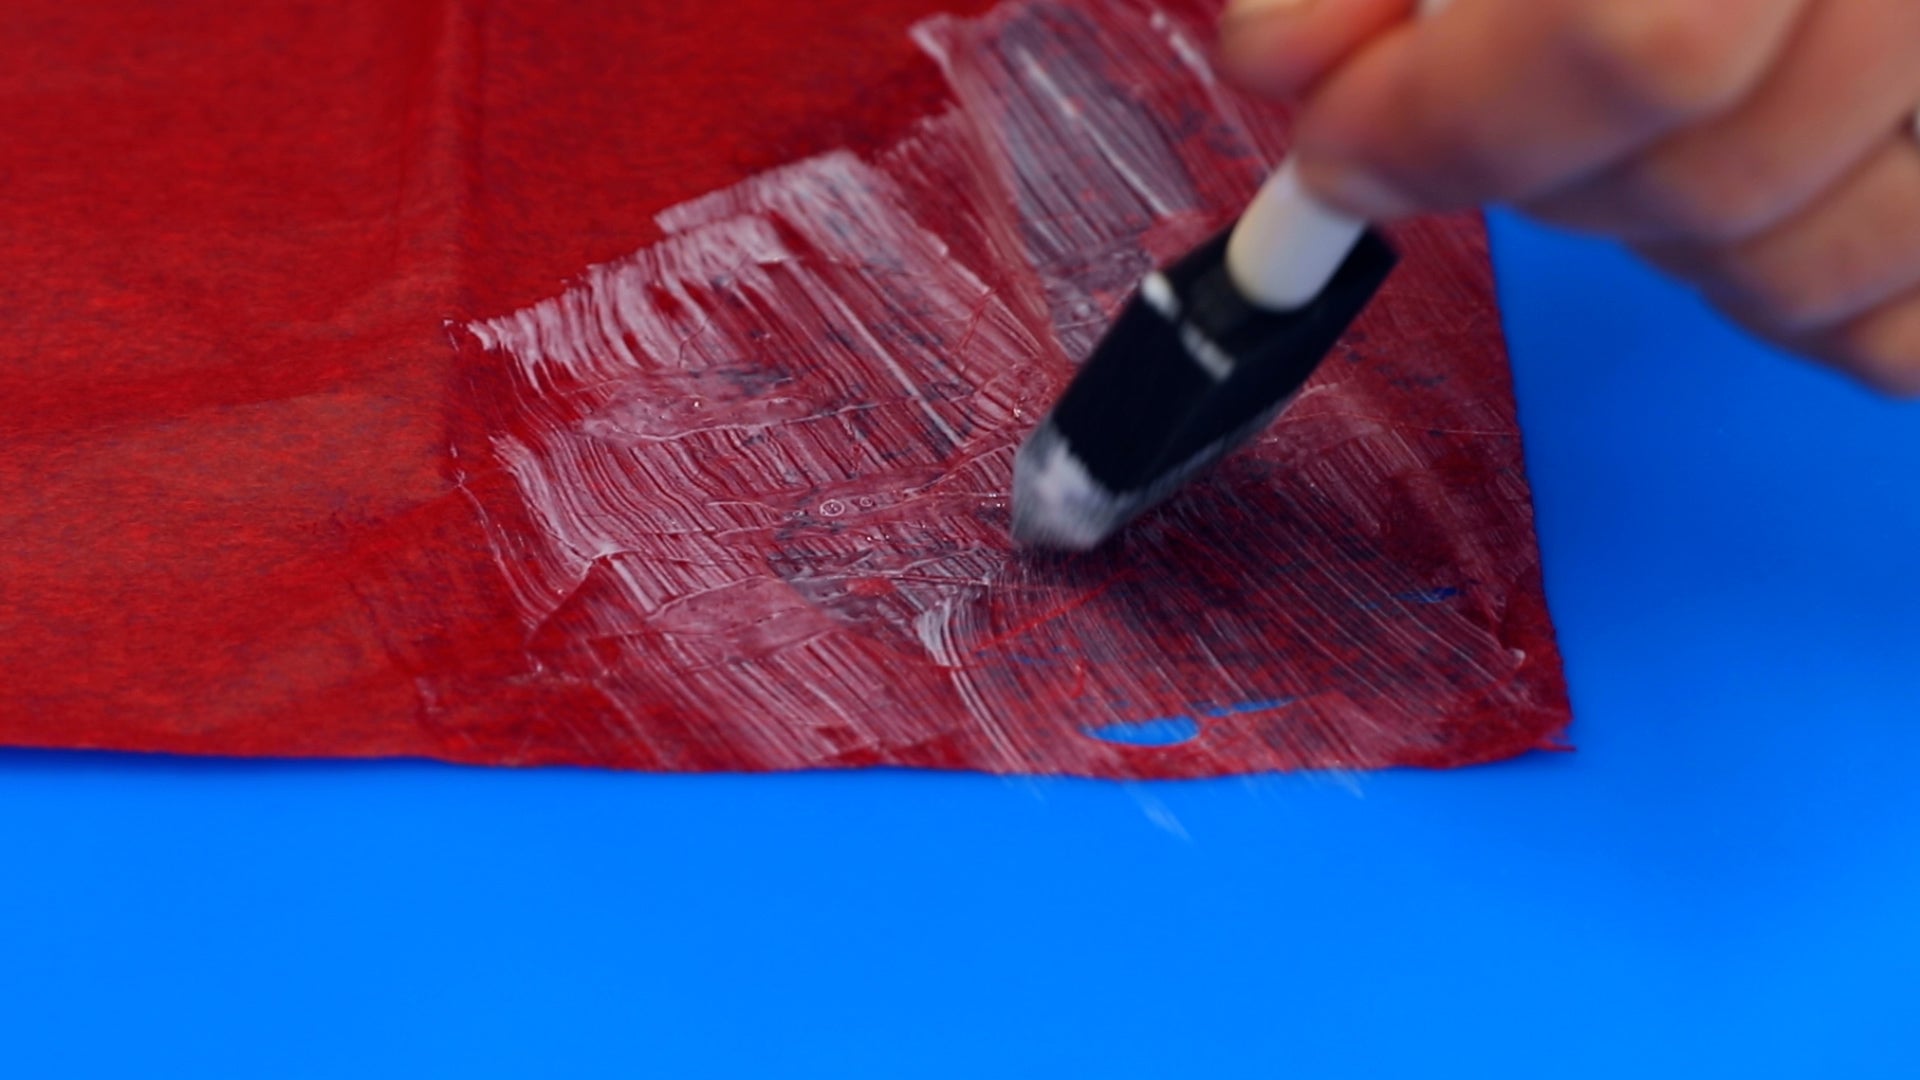 tissue paper can tear after applying sealant